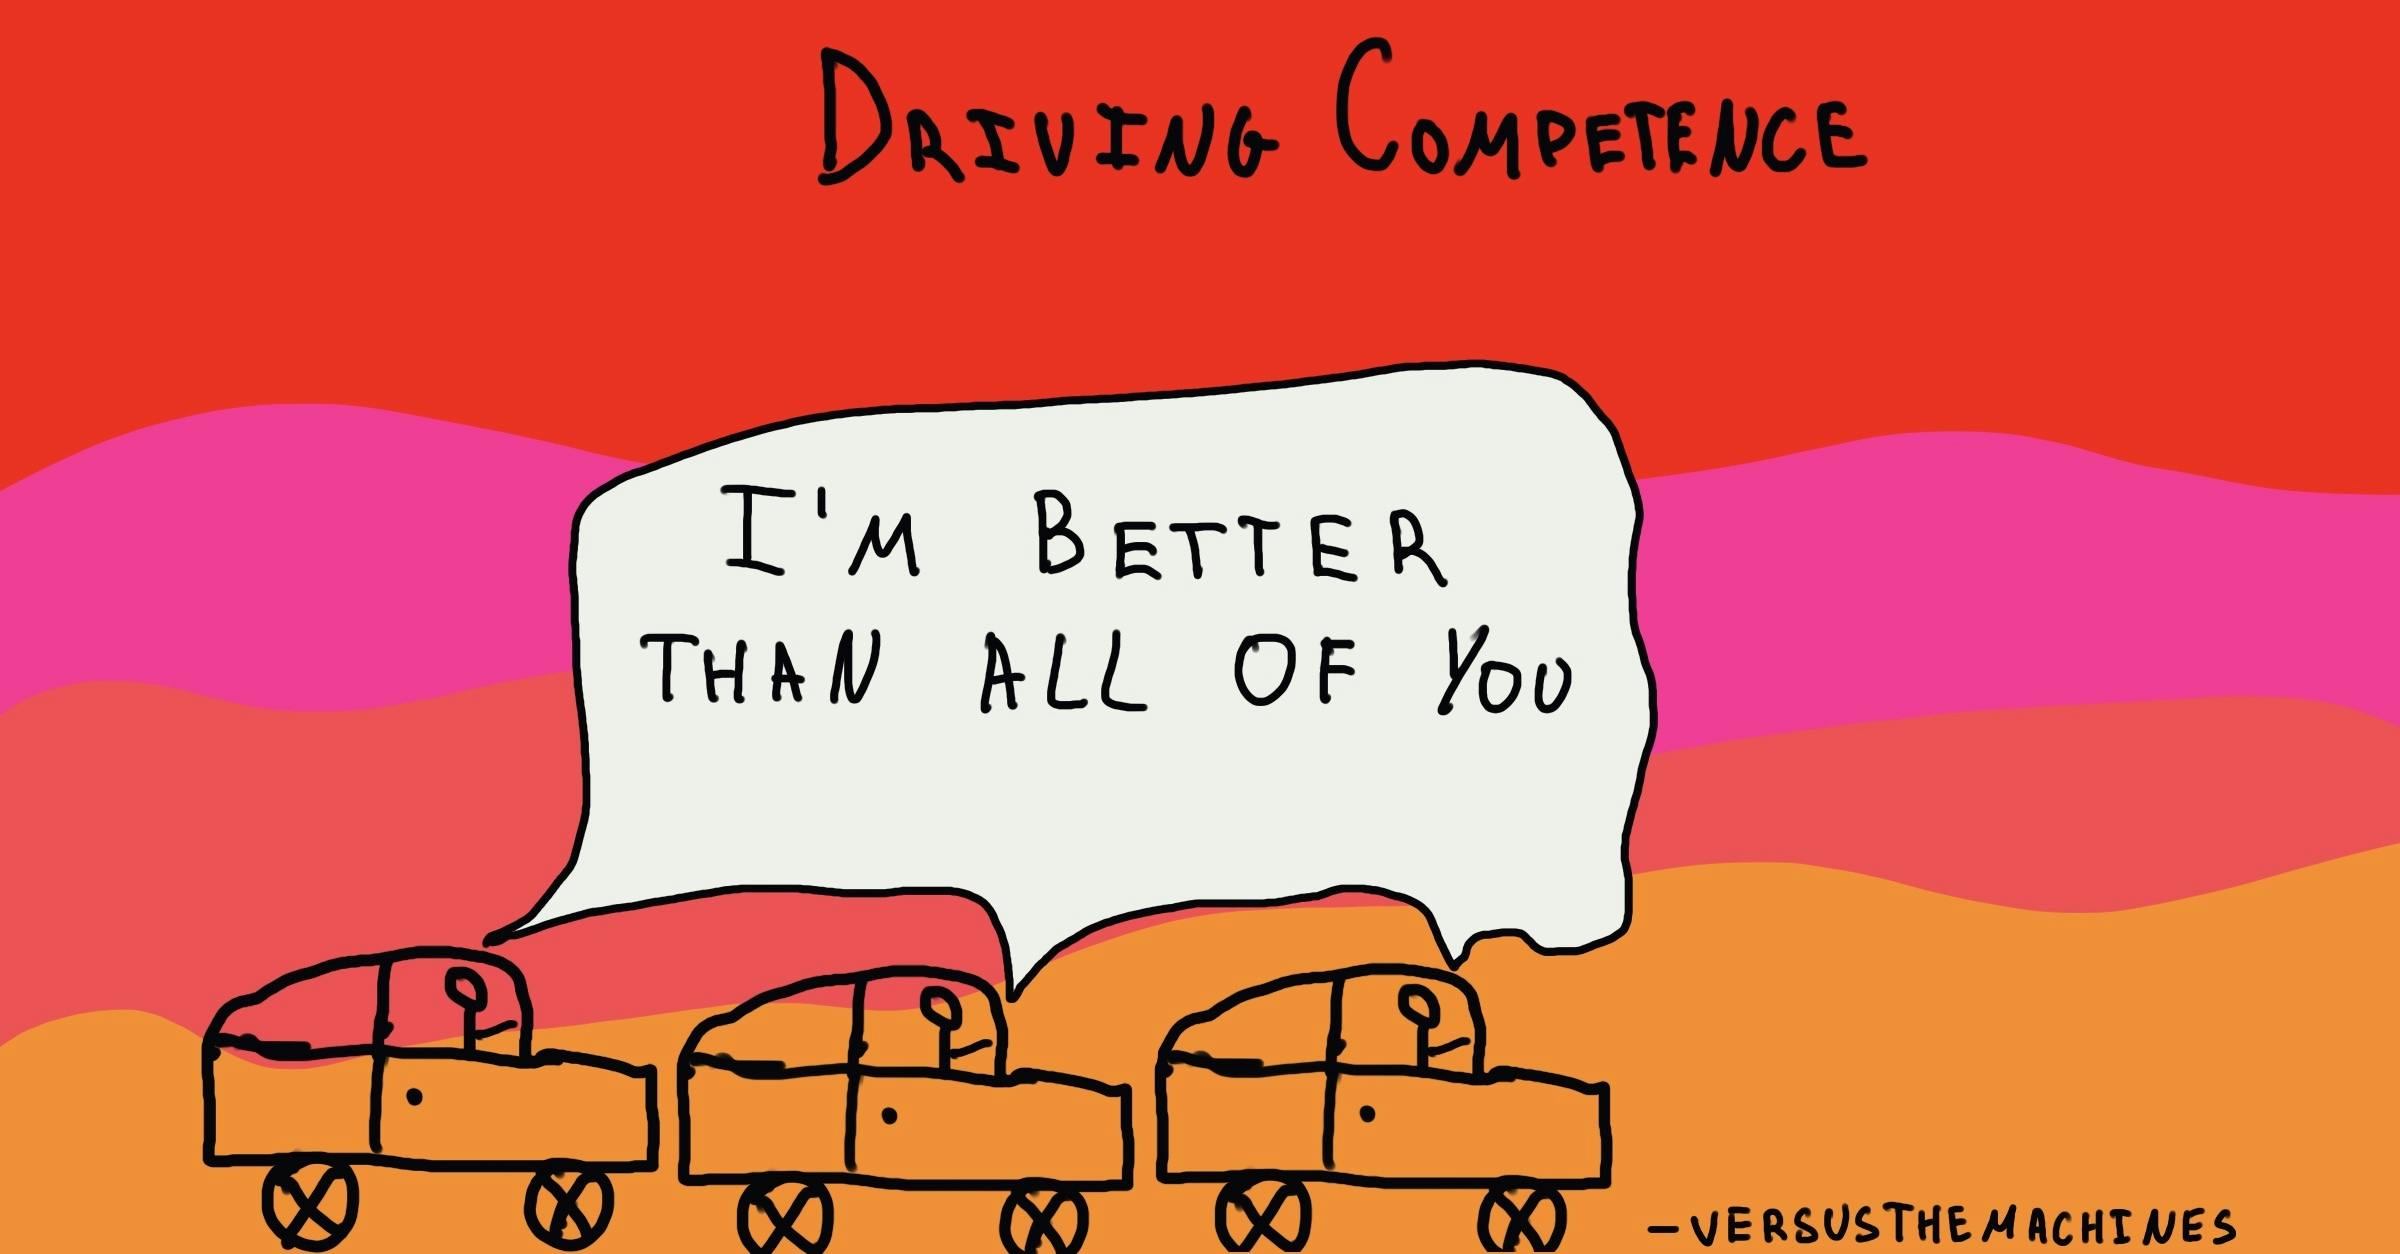 Dunning Kruger and Driving Competence